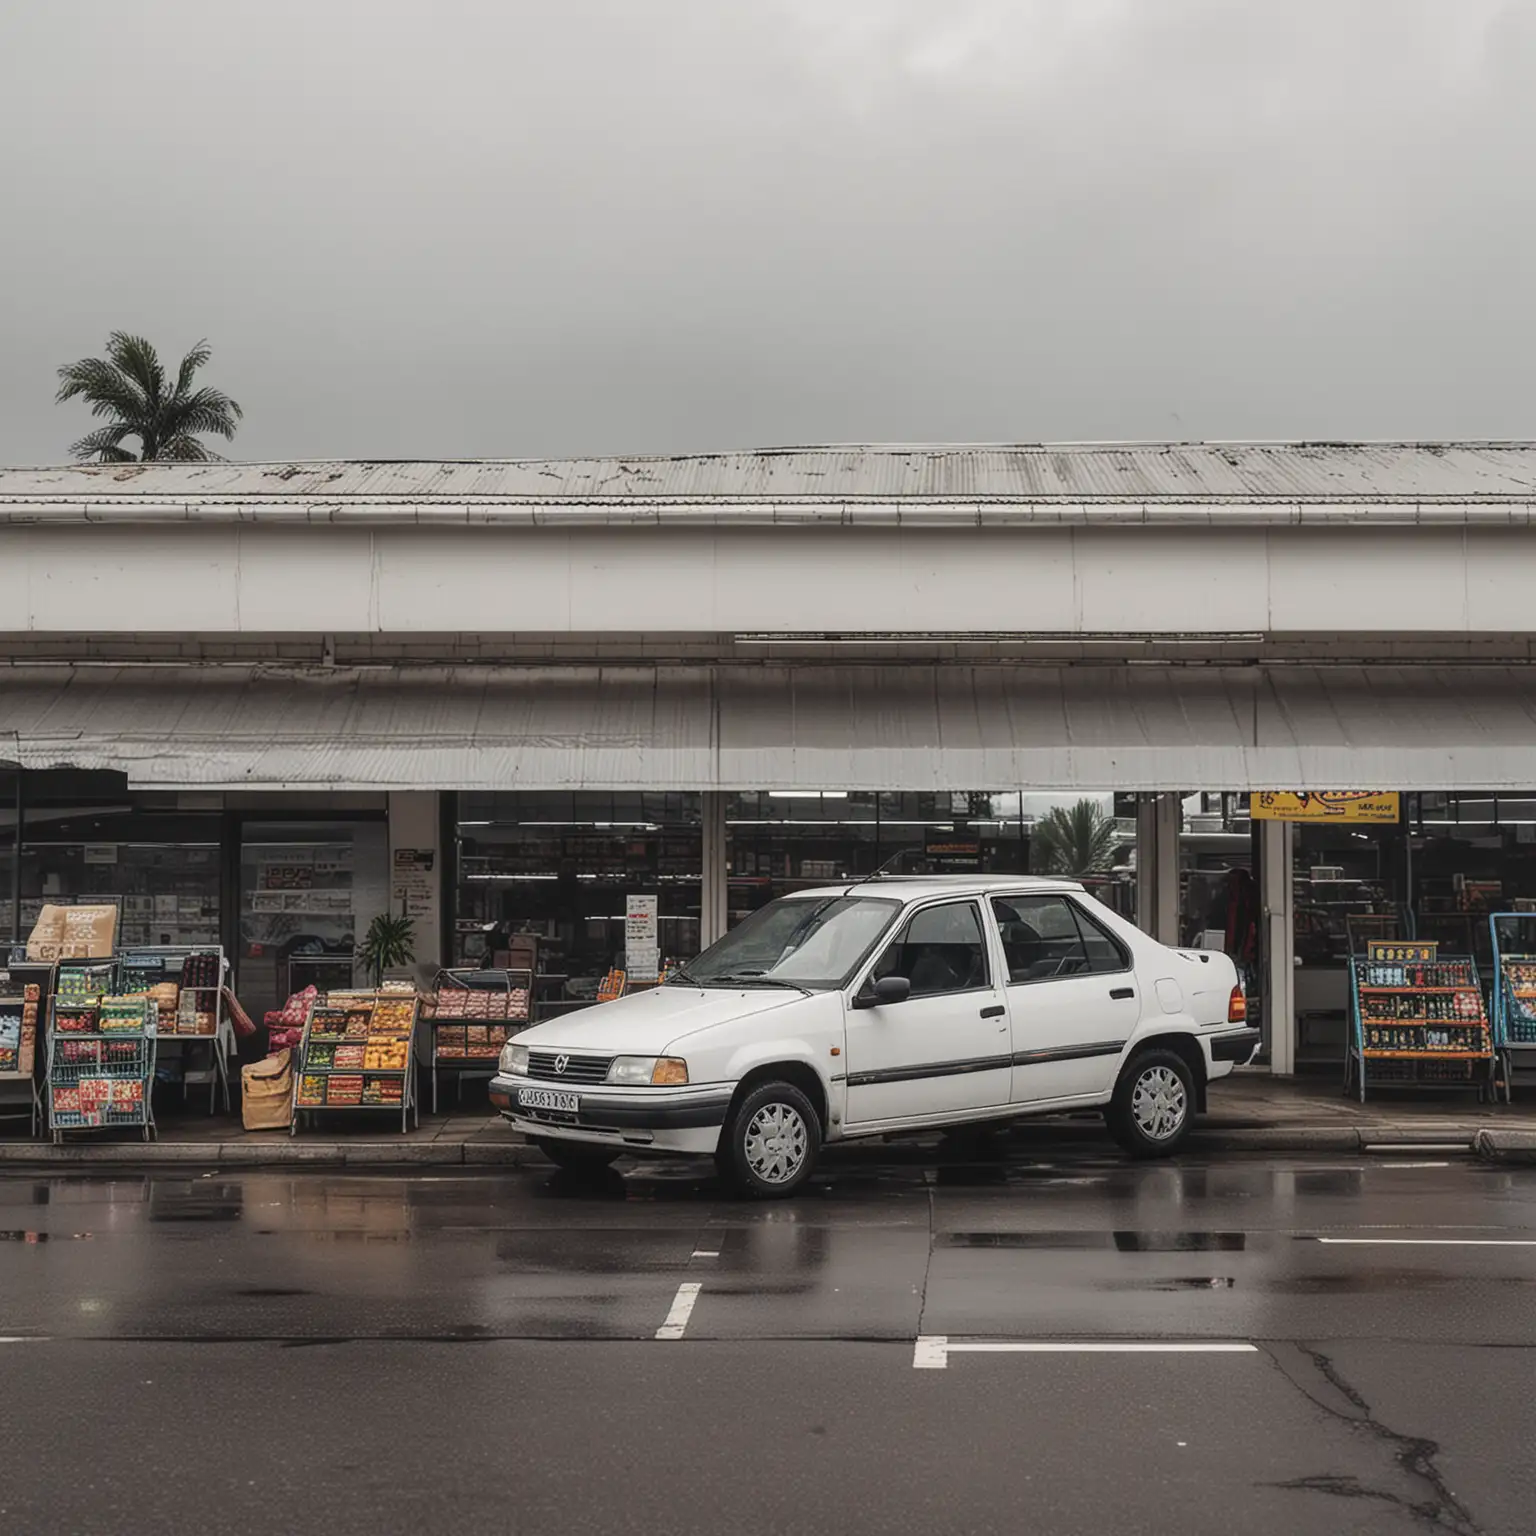 Gloomy Tropical Atmosphere White Renault 19 Parked Outside Small Supermarket